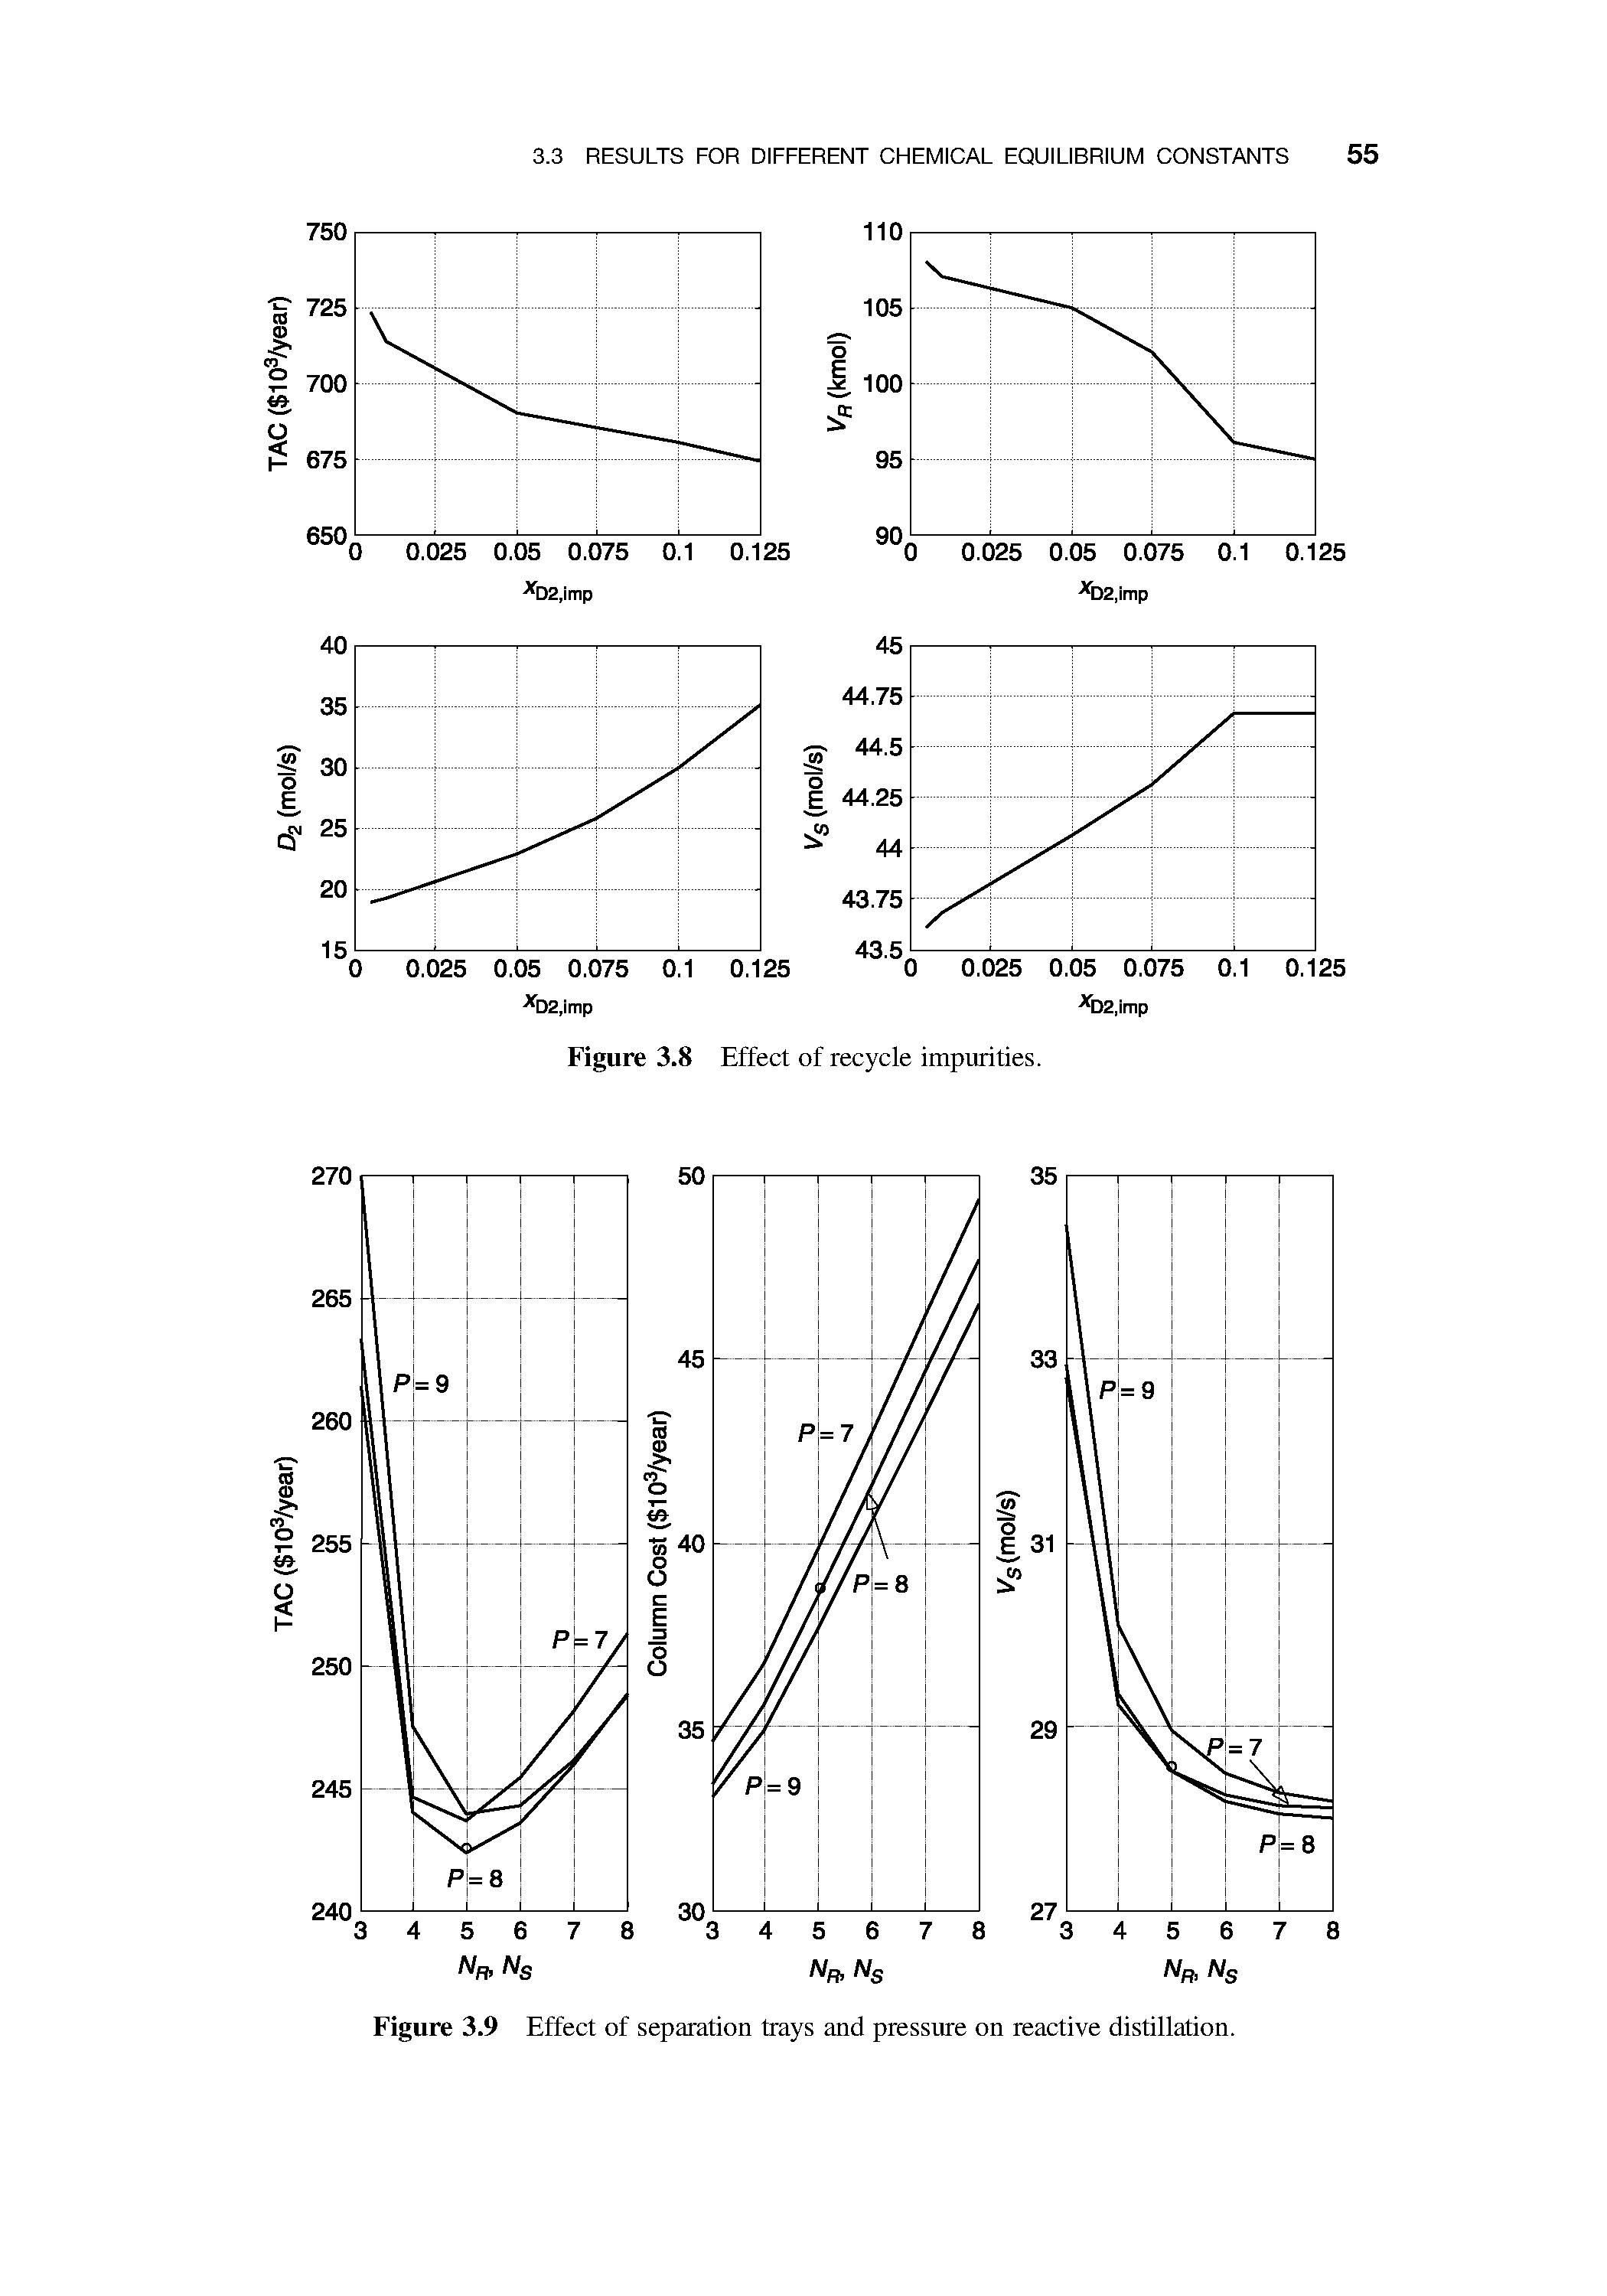 Figure 3.9 Effect of separation trays and pressure on reactive distillation.